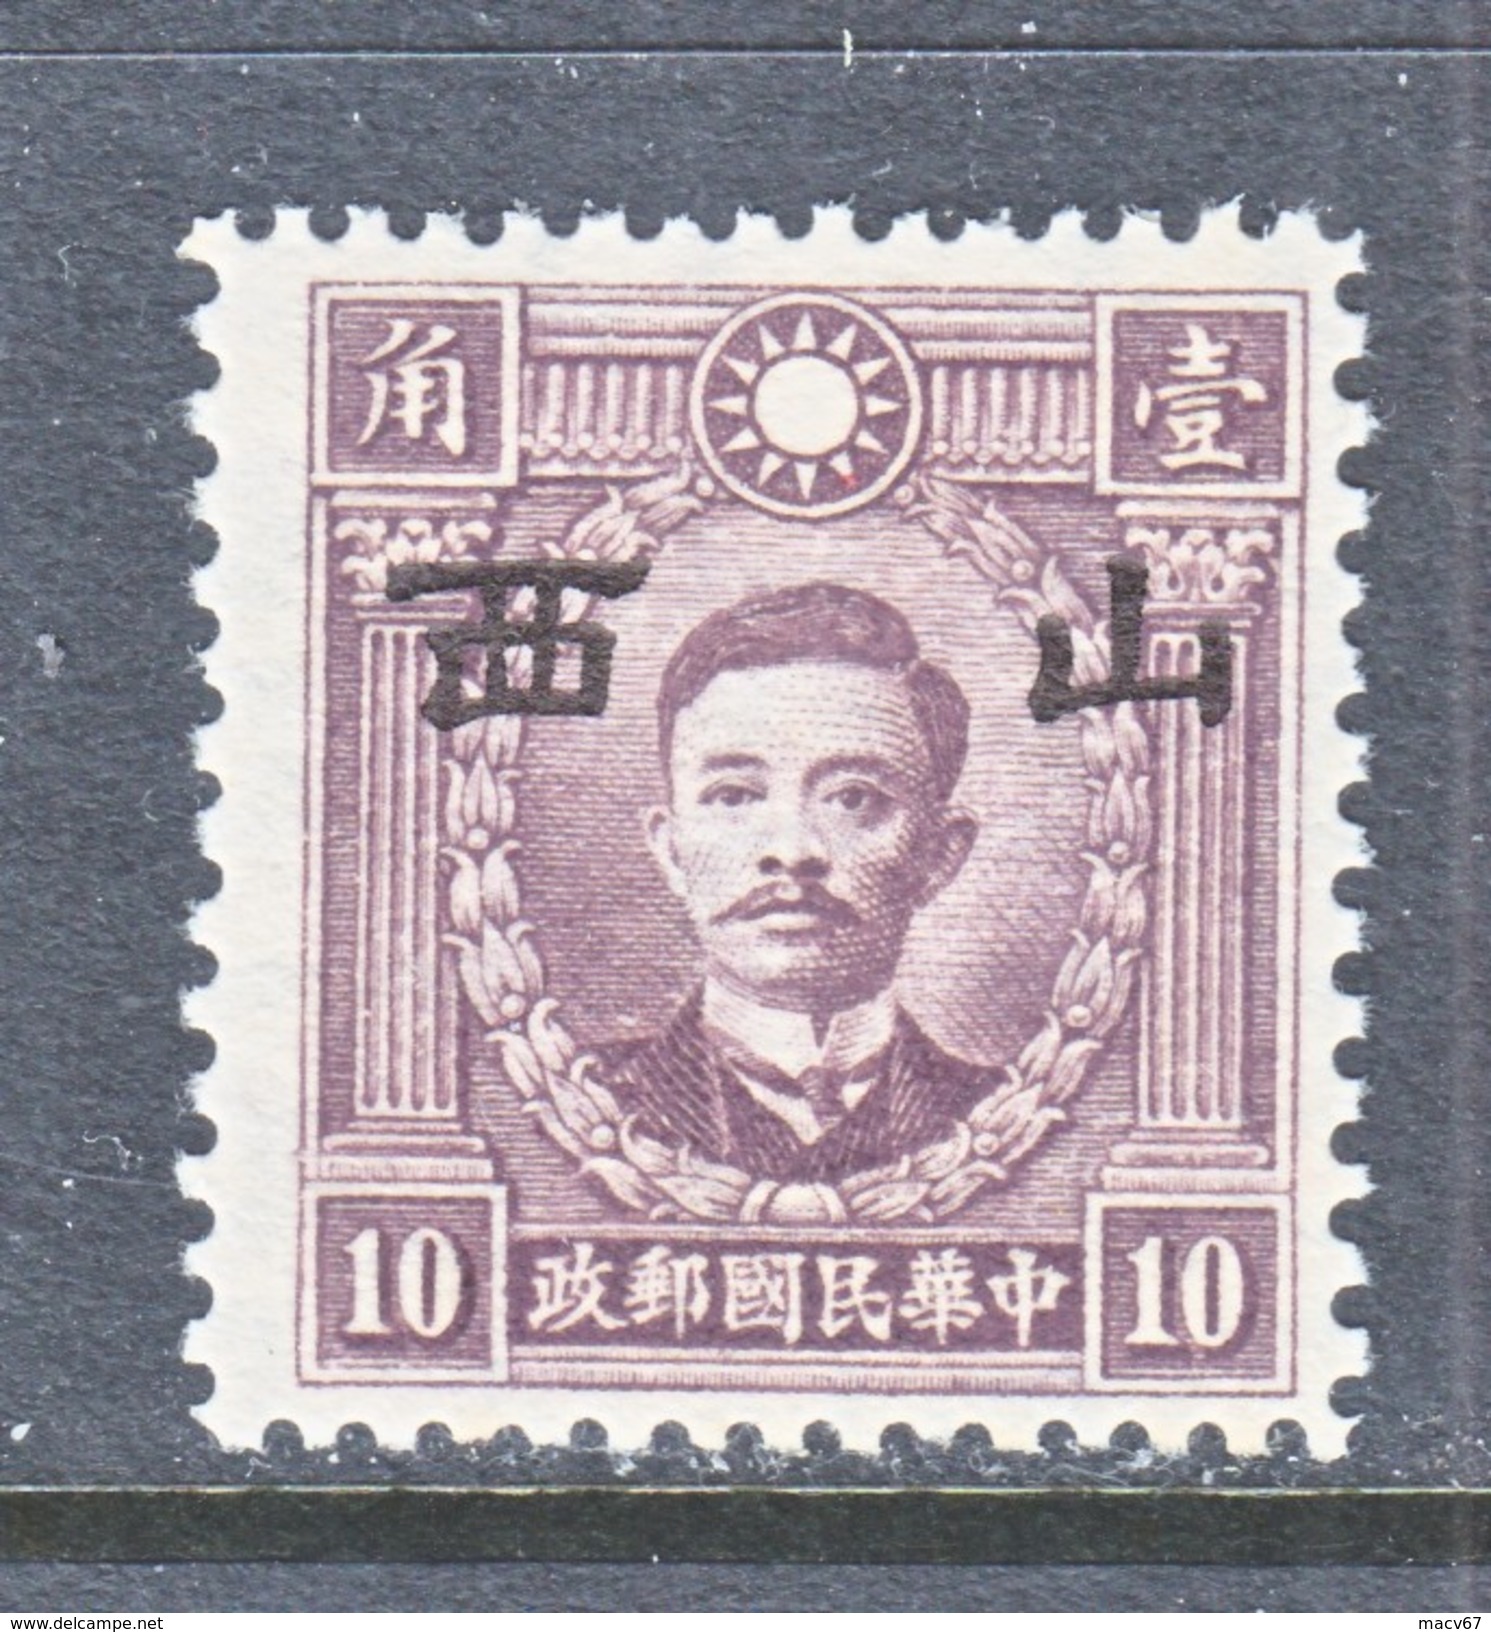 JAPANESE  OCCUP.  SHANSI   5 N 38     **  VARIETY  TYPE II  MA  CN 496 - 1941-45 Cina Del Nord